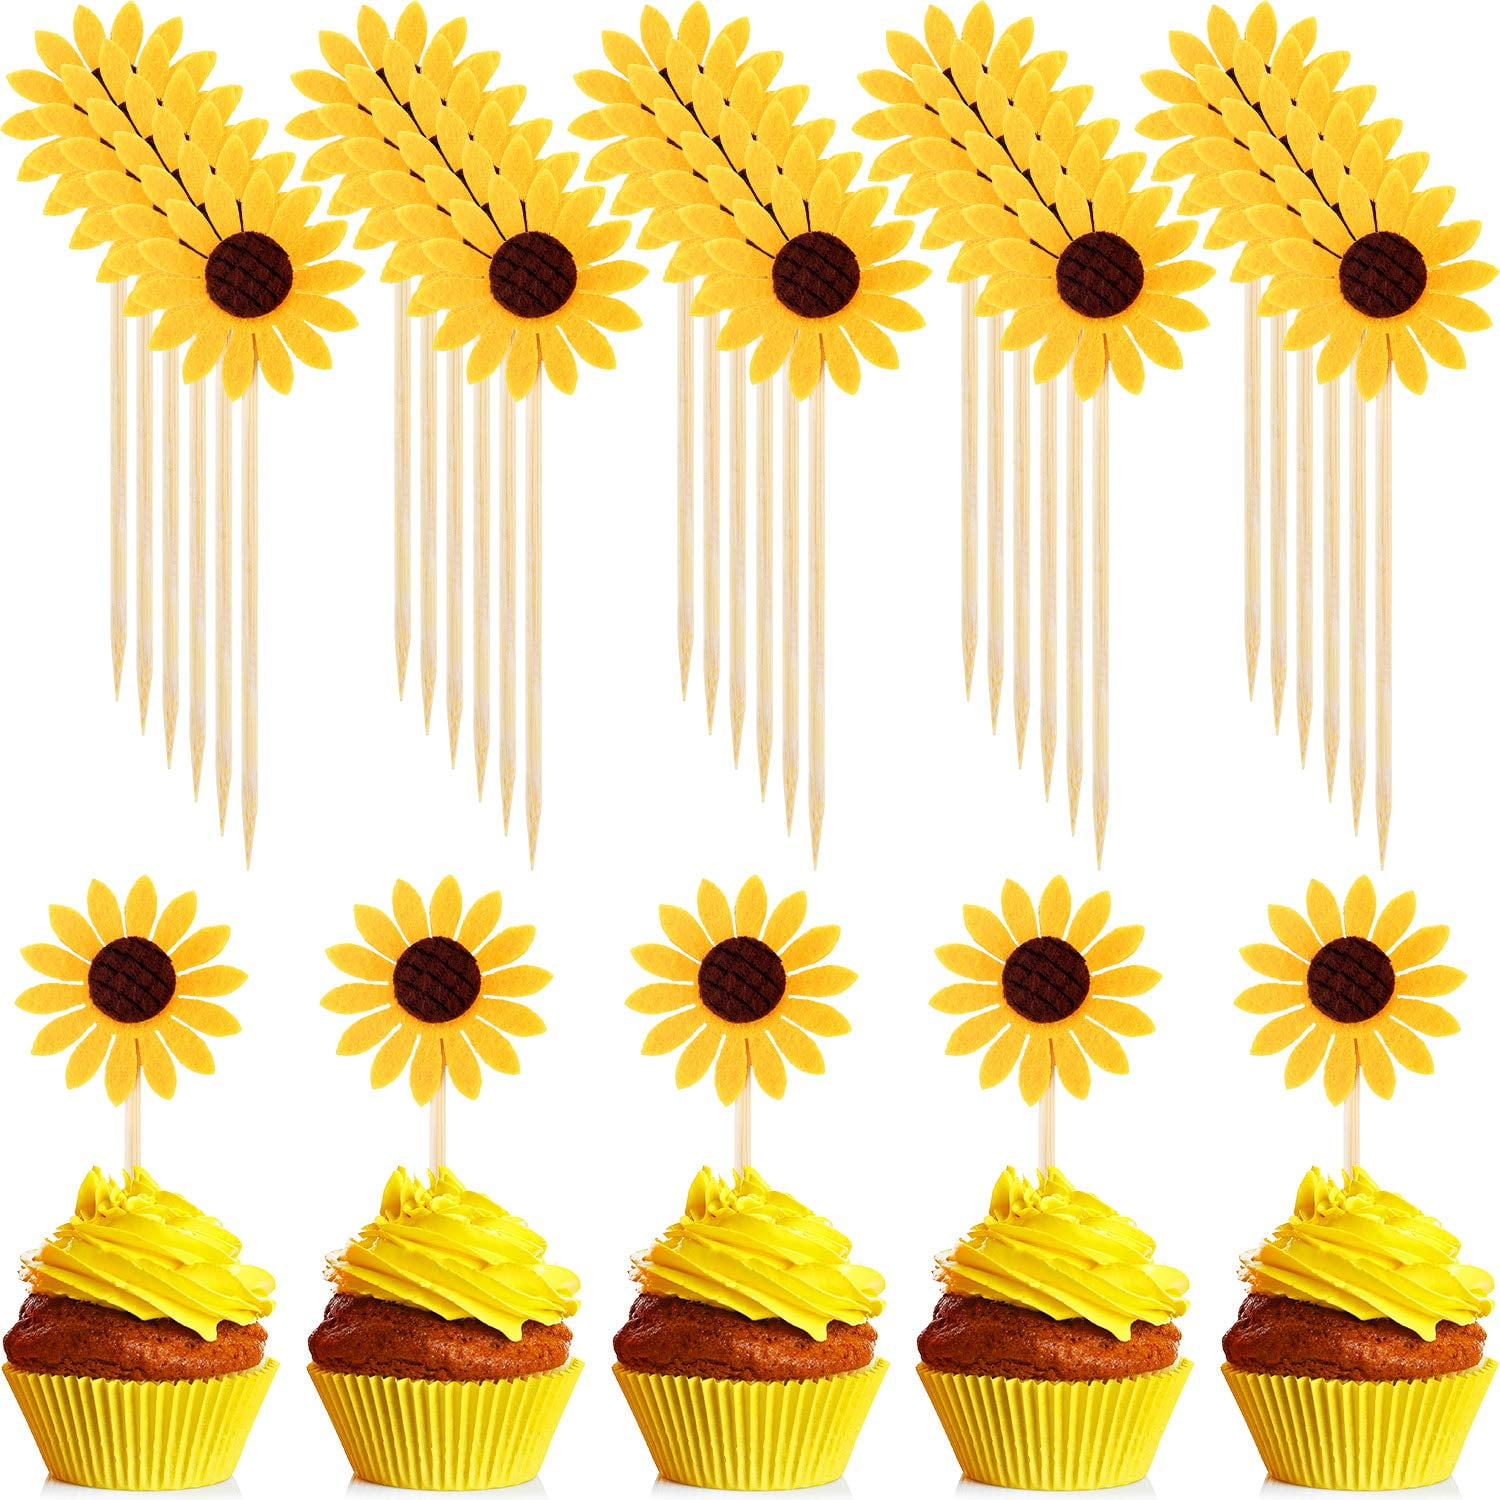 60 Pieces Sunflower Cupcake Toppers Cupcake Desserts Toppers Sun Flower